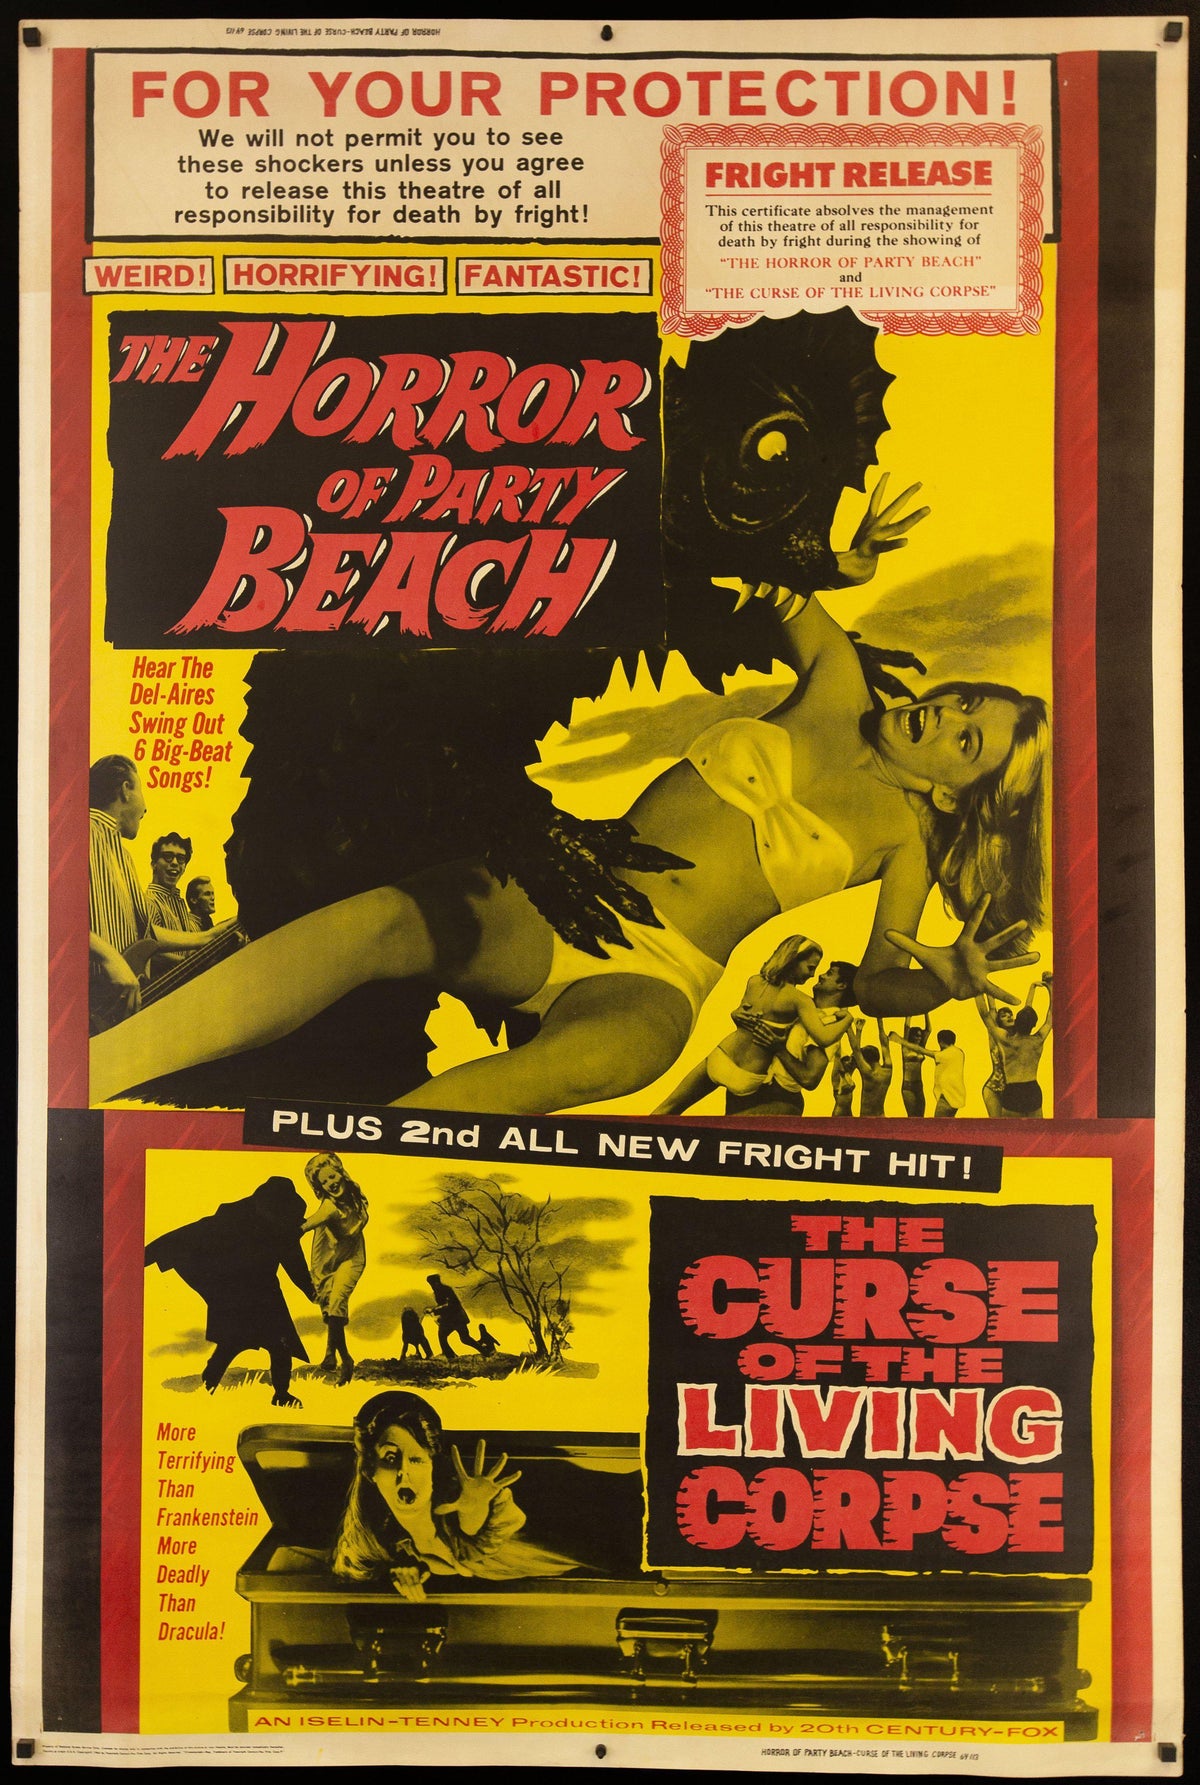 The Horror of Party Beach / The Curse of the Living Corpse 40x60 Original Vintage Movie Poster